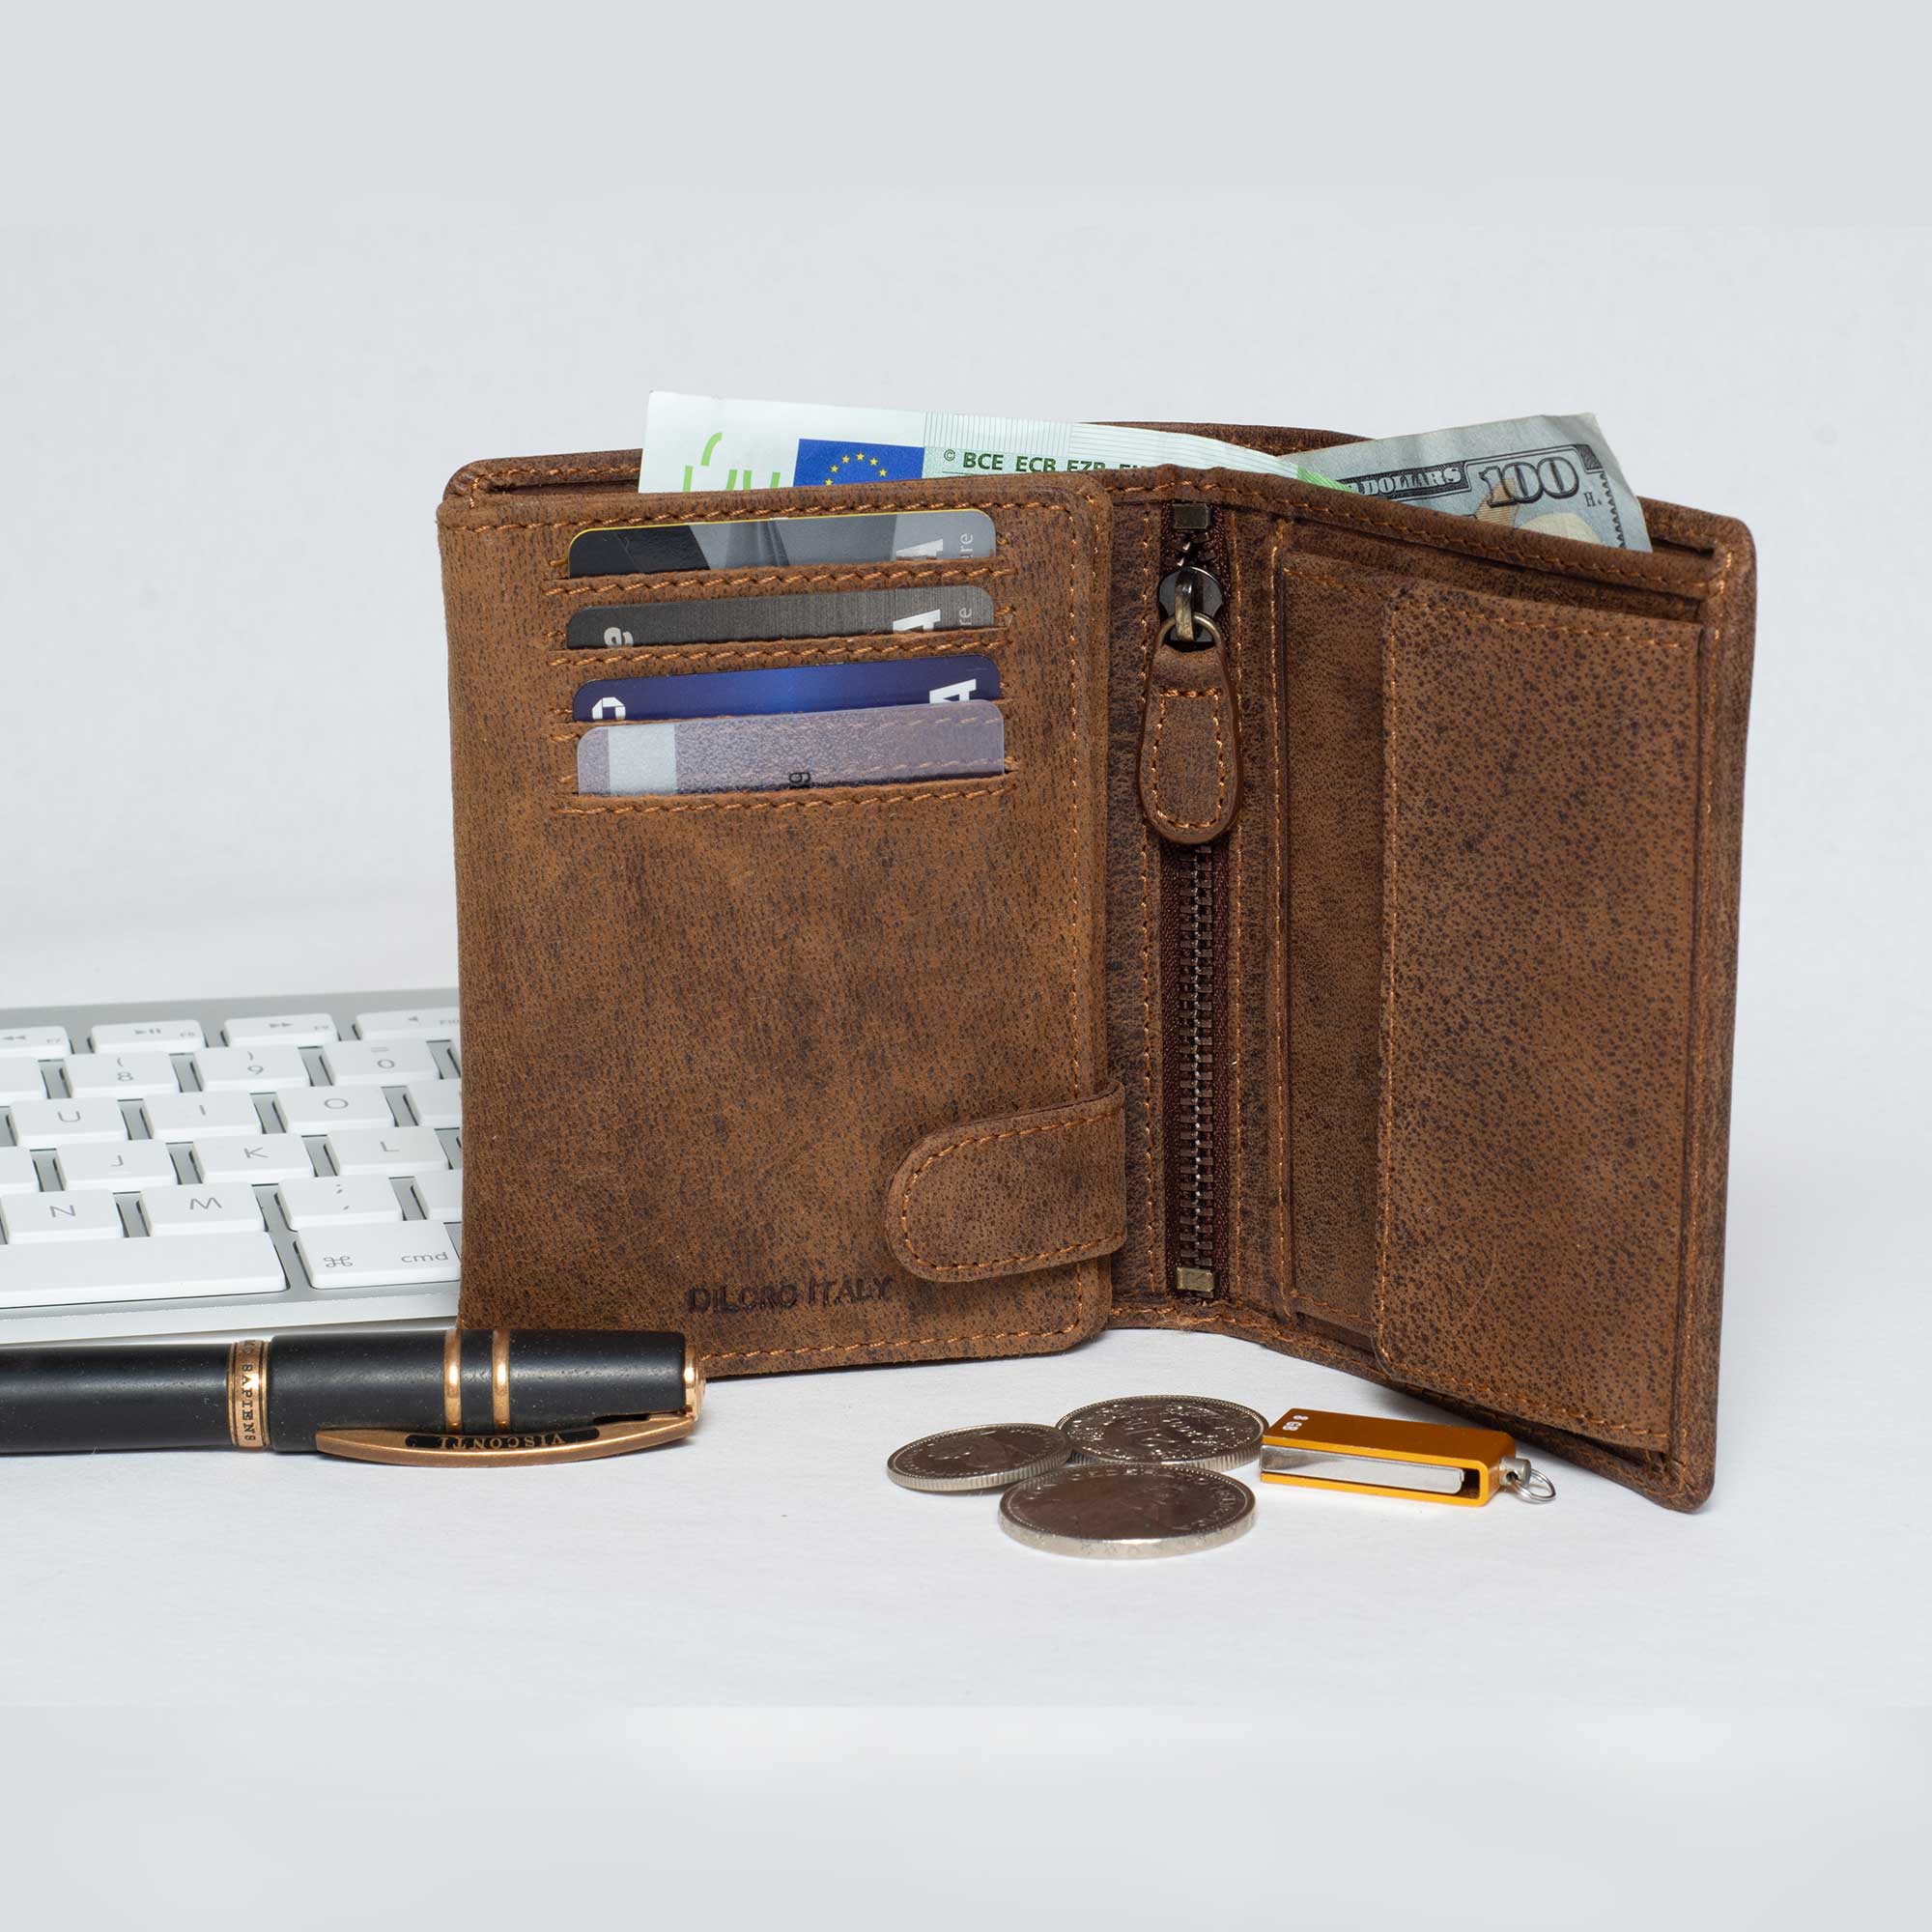 DiLoro Men's Vertical Leather Bifold Flip ID Zip Coin Wallet Dark Hunter Brown RFID Save with Visconti Pen and Keyboard